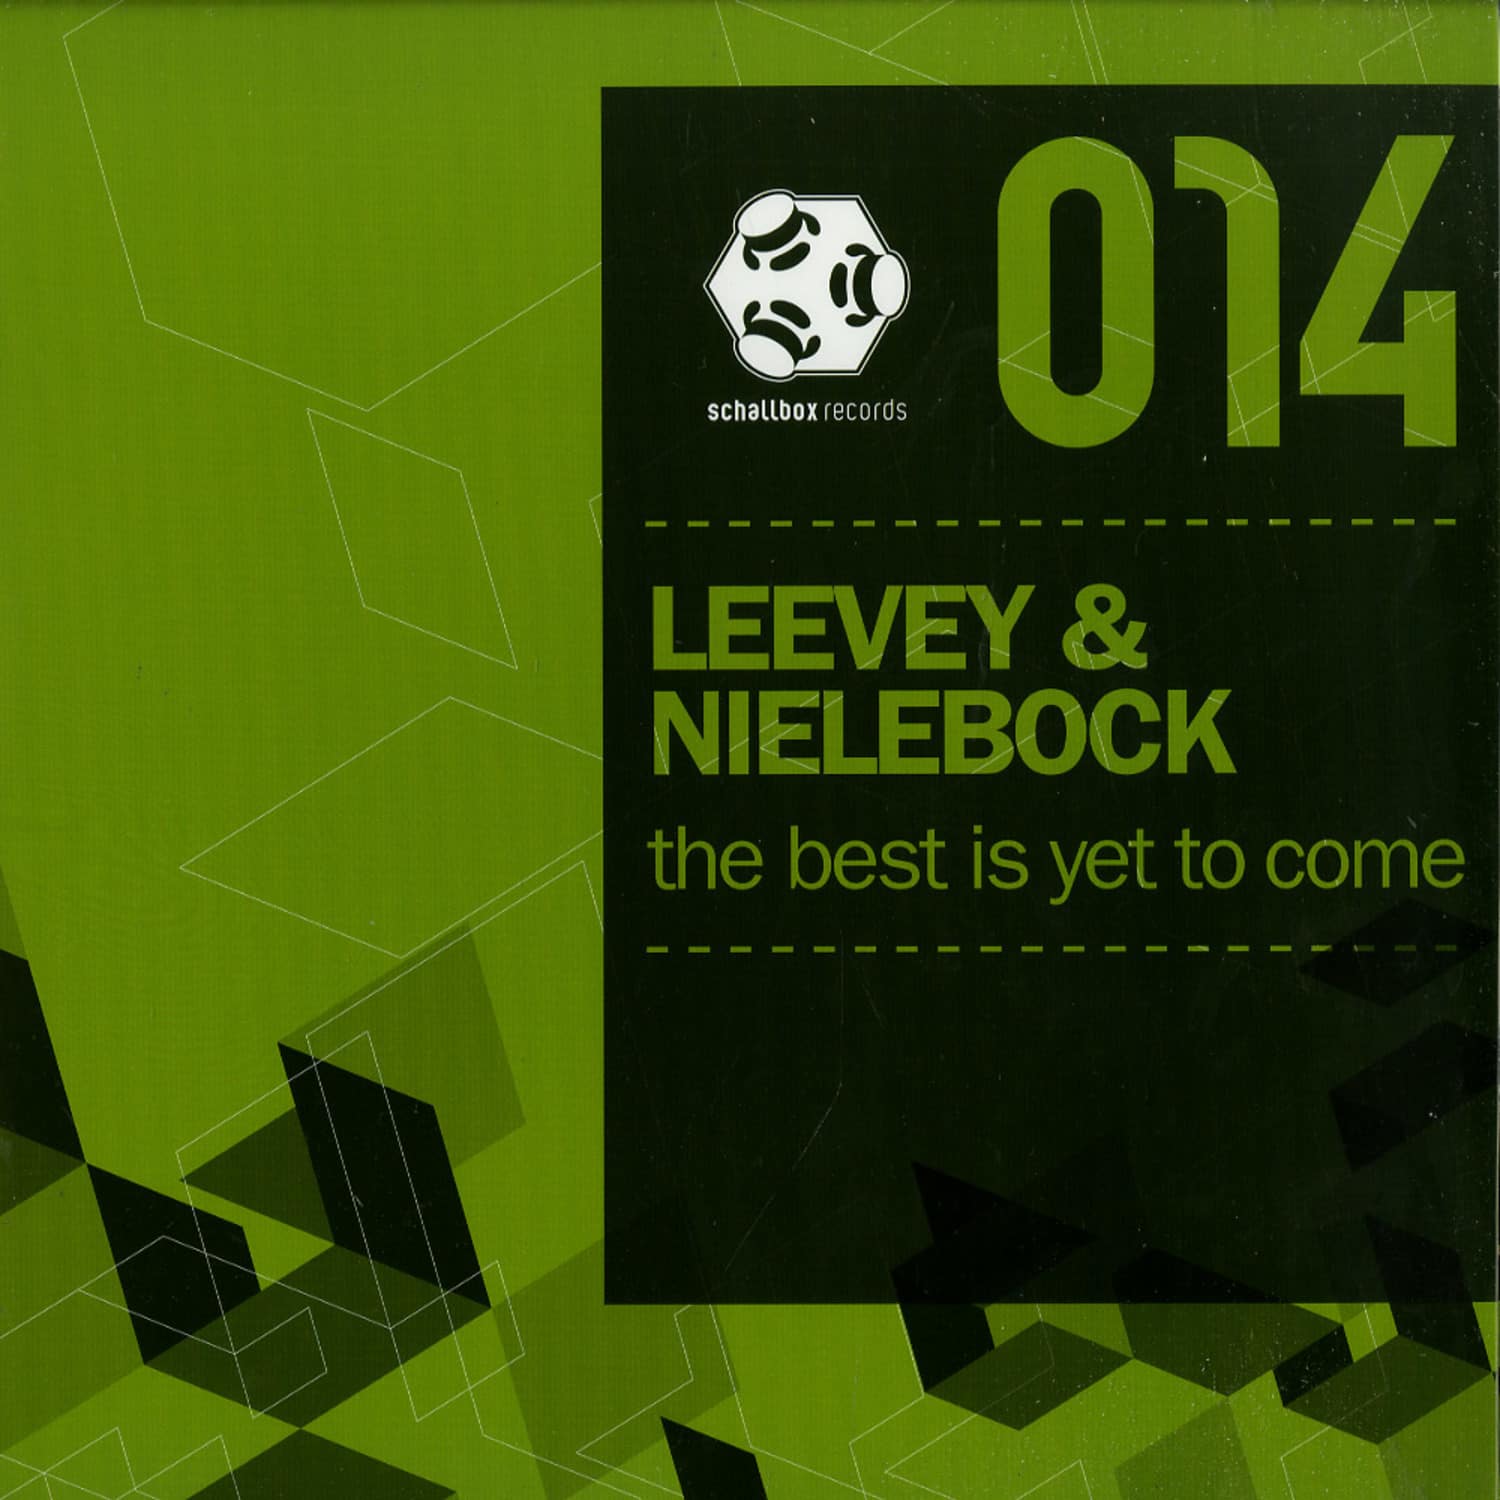 Leevey & Nielebock - THE BEST IS YET TO COME